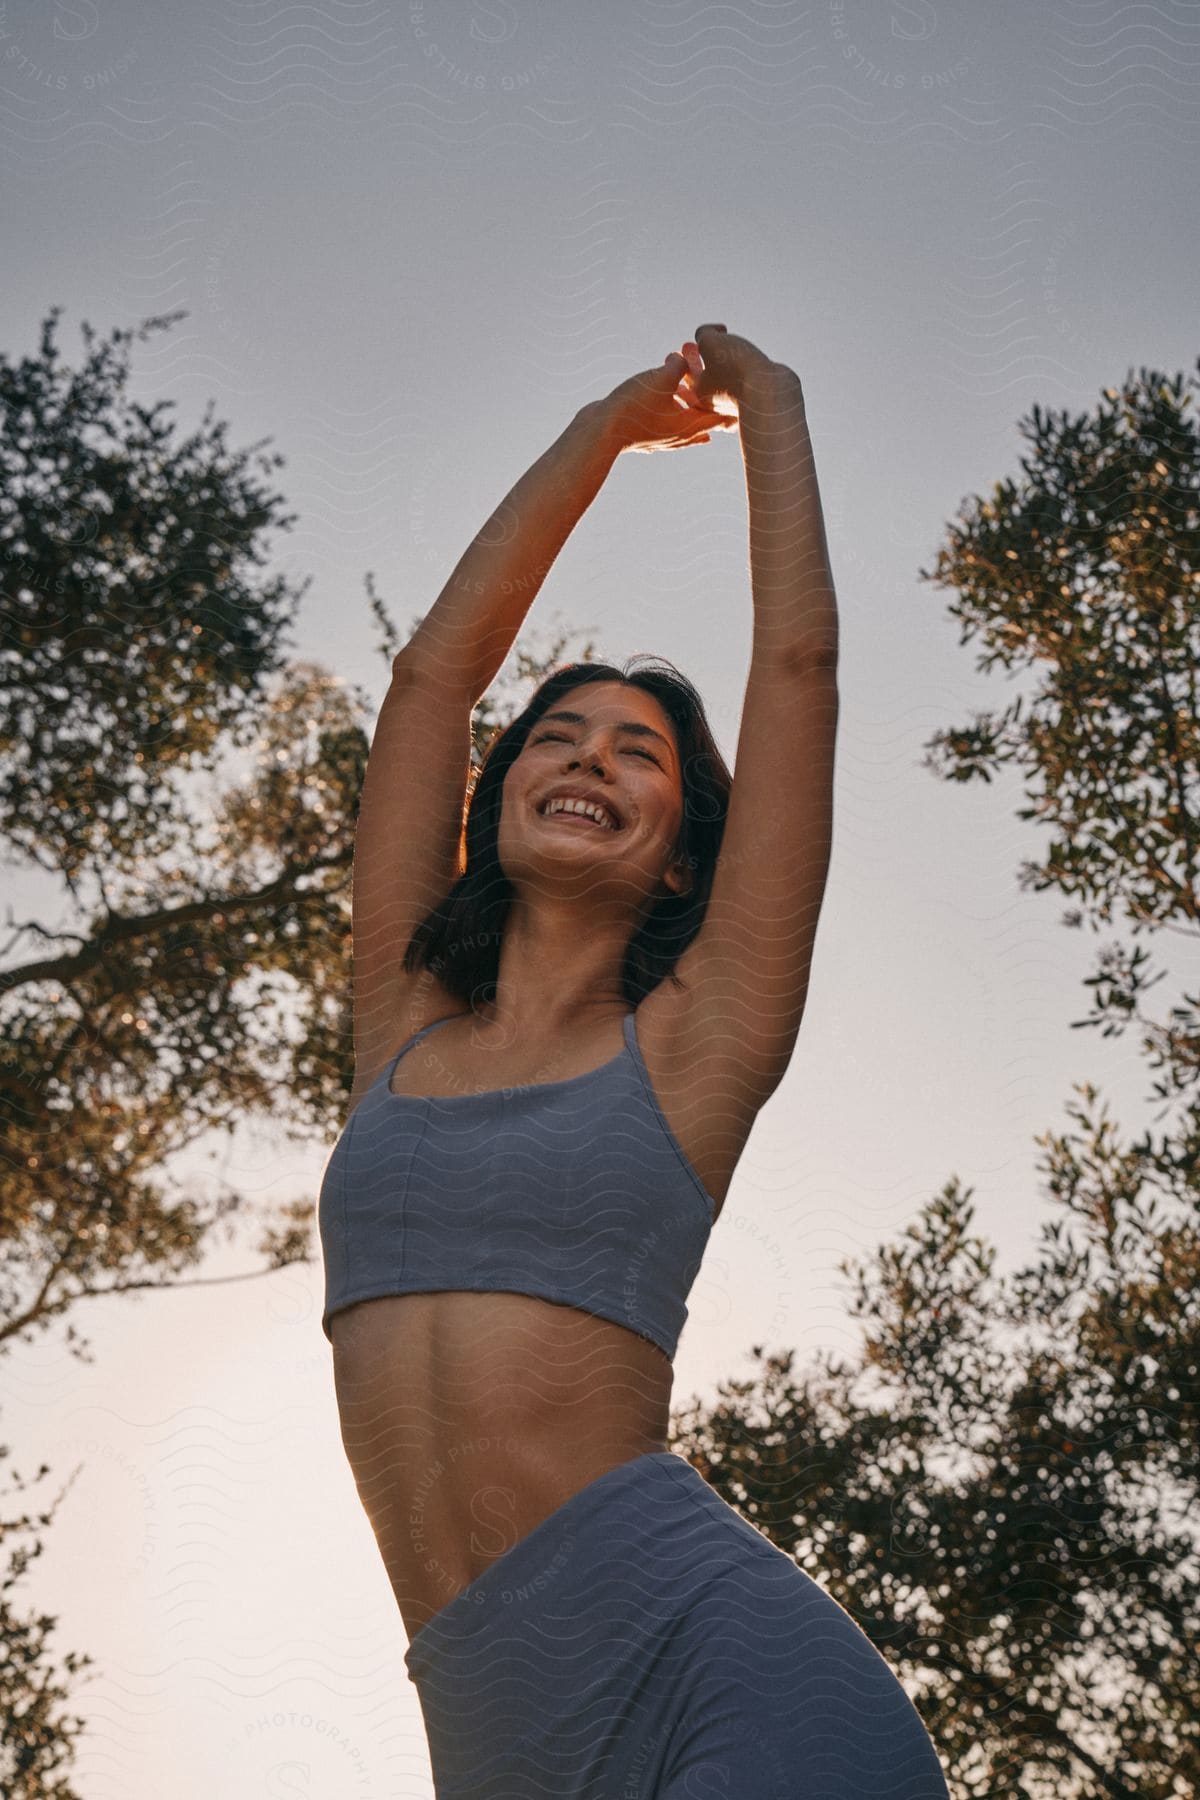 Smiling woman with arms raised in sportswear against an sky and tree silhouettes.